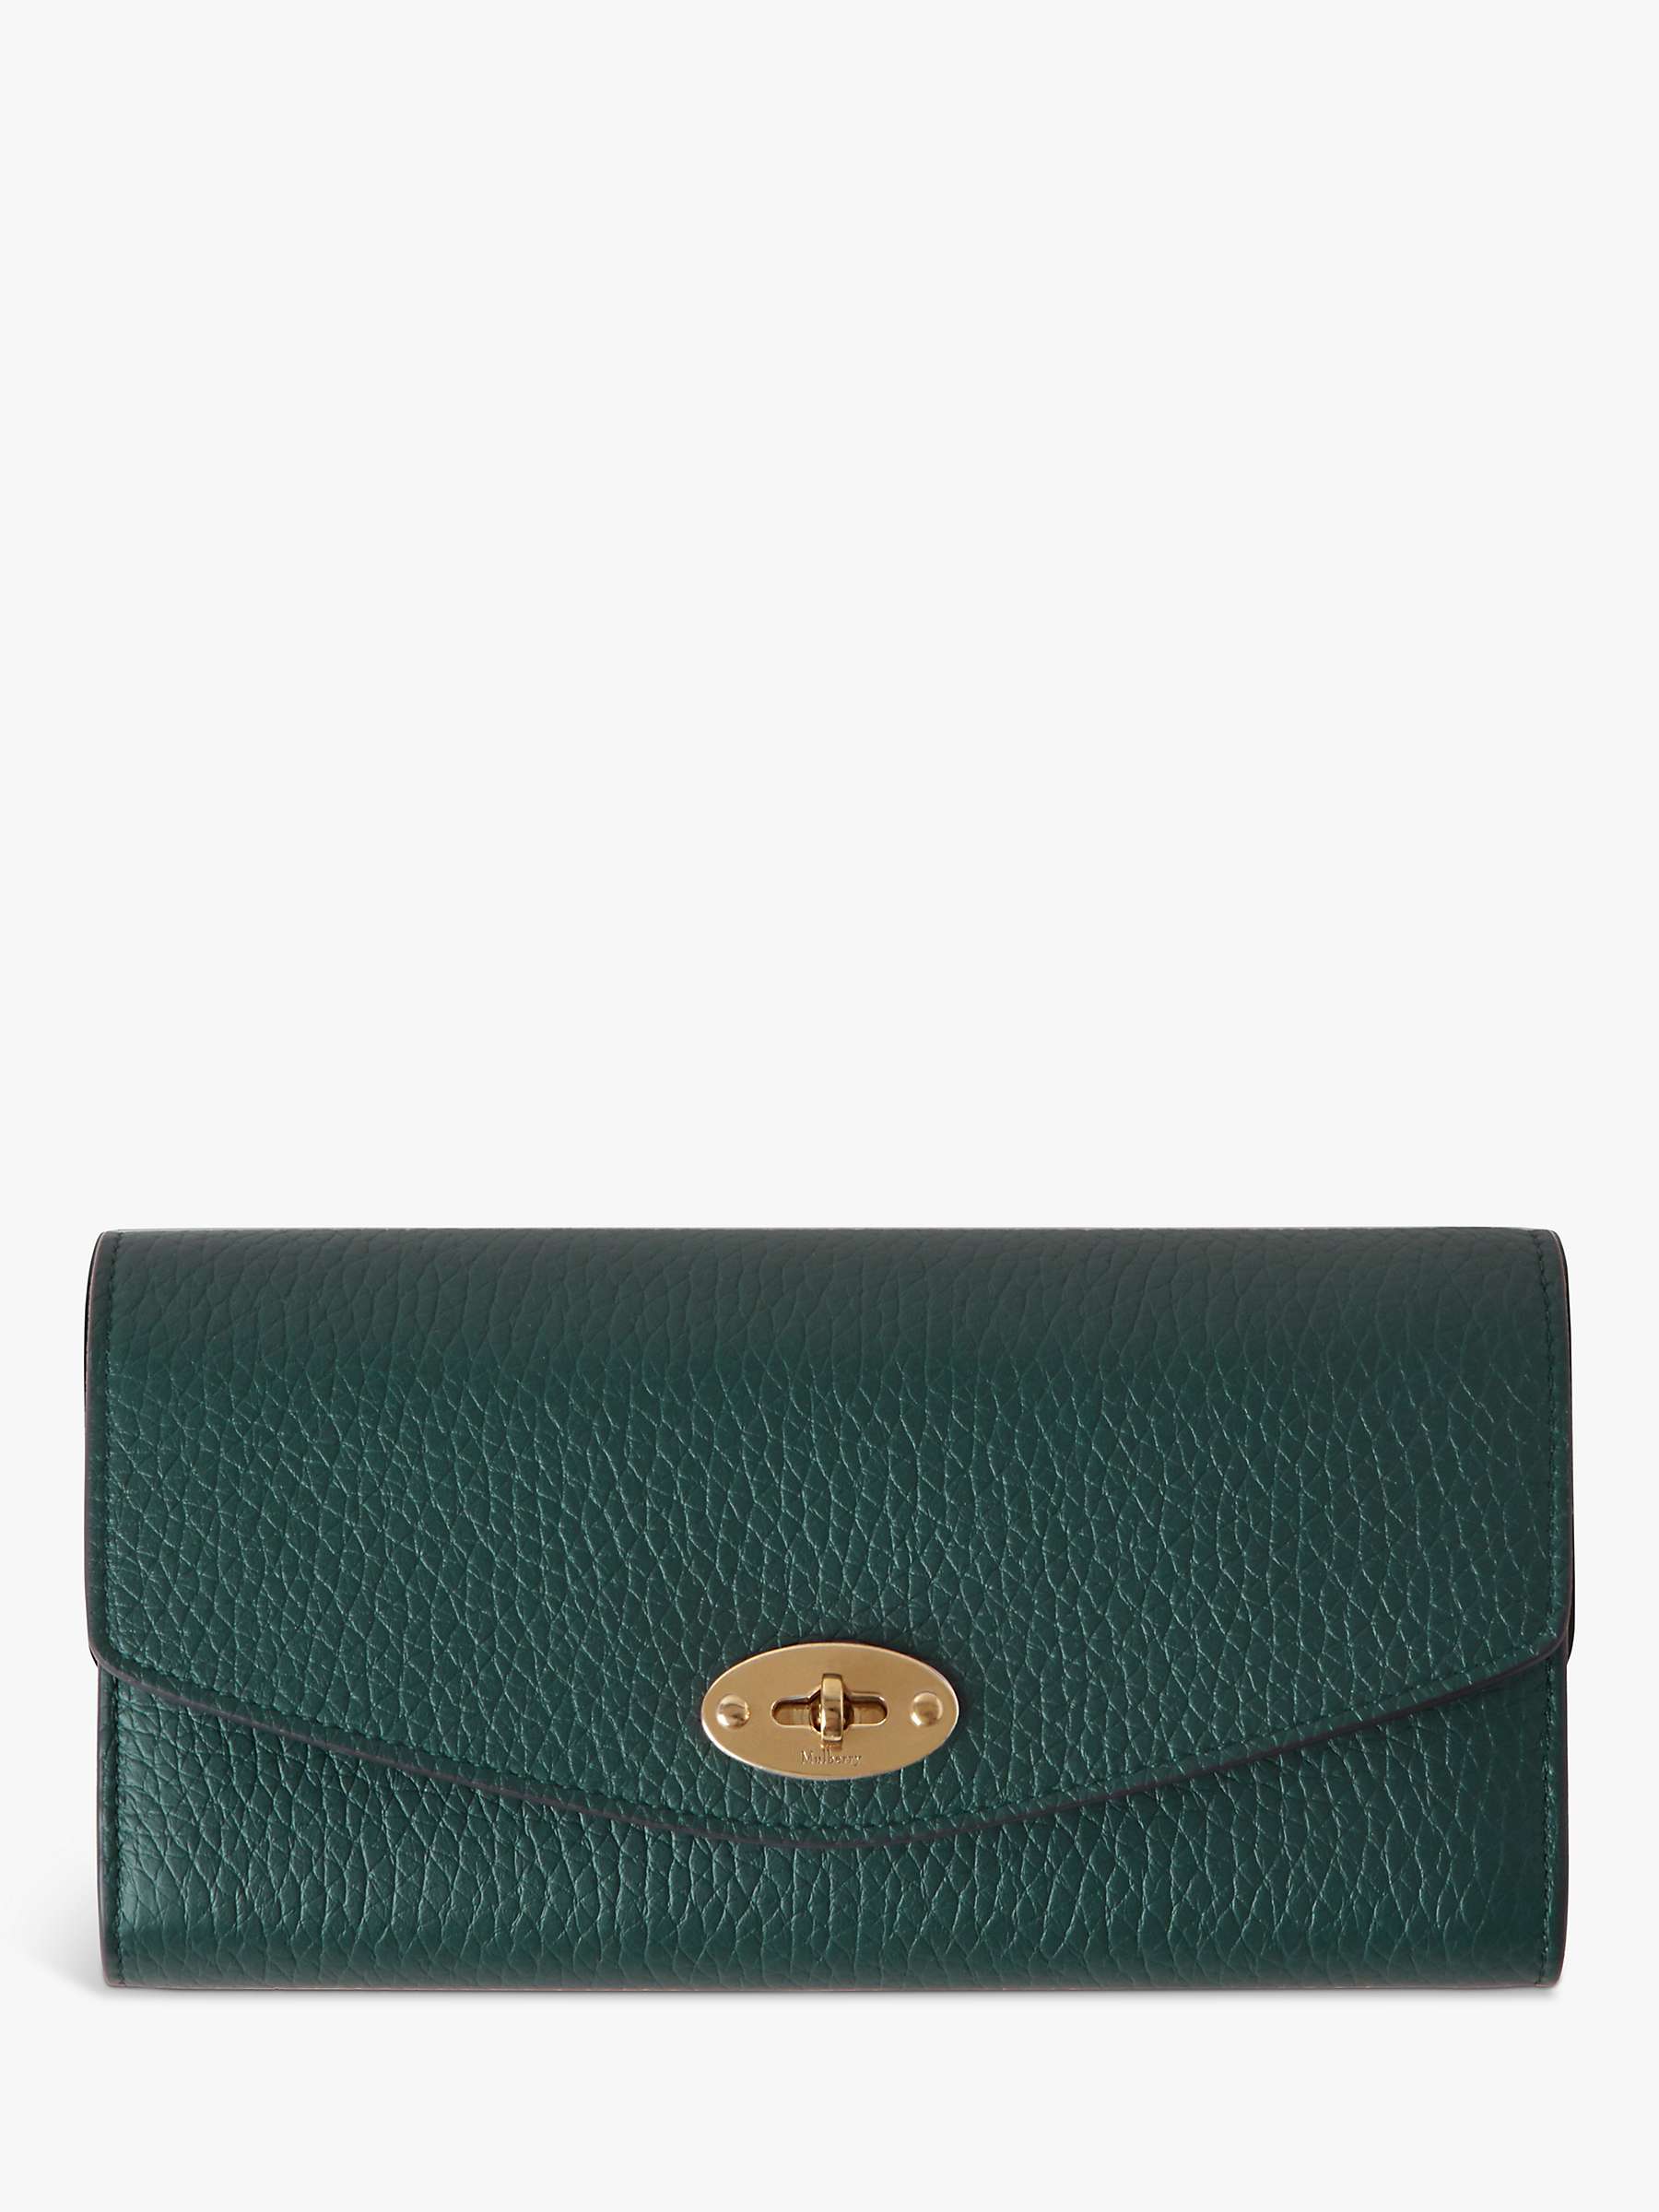 Buy Mulberry Darley Heavy Grain Leather Wallet Online at johnlewis.com